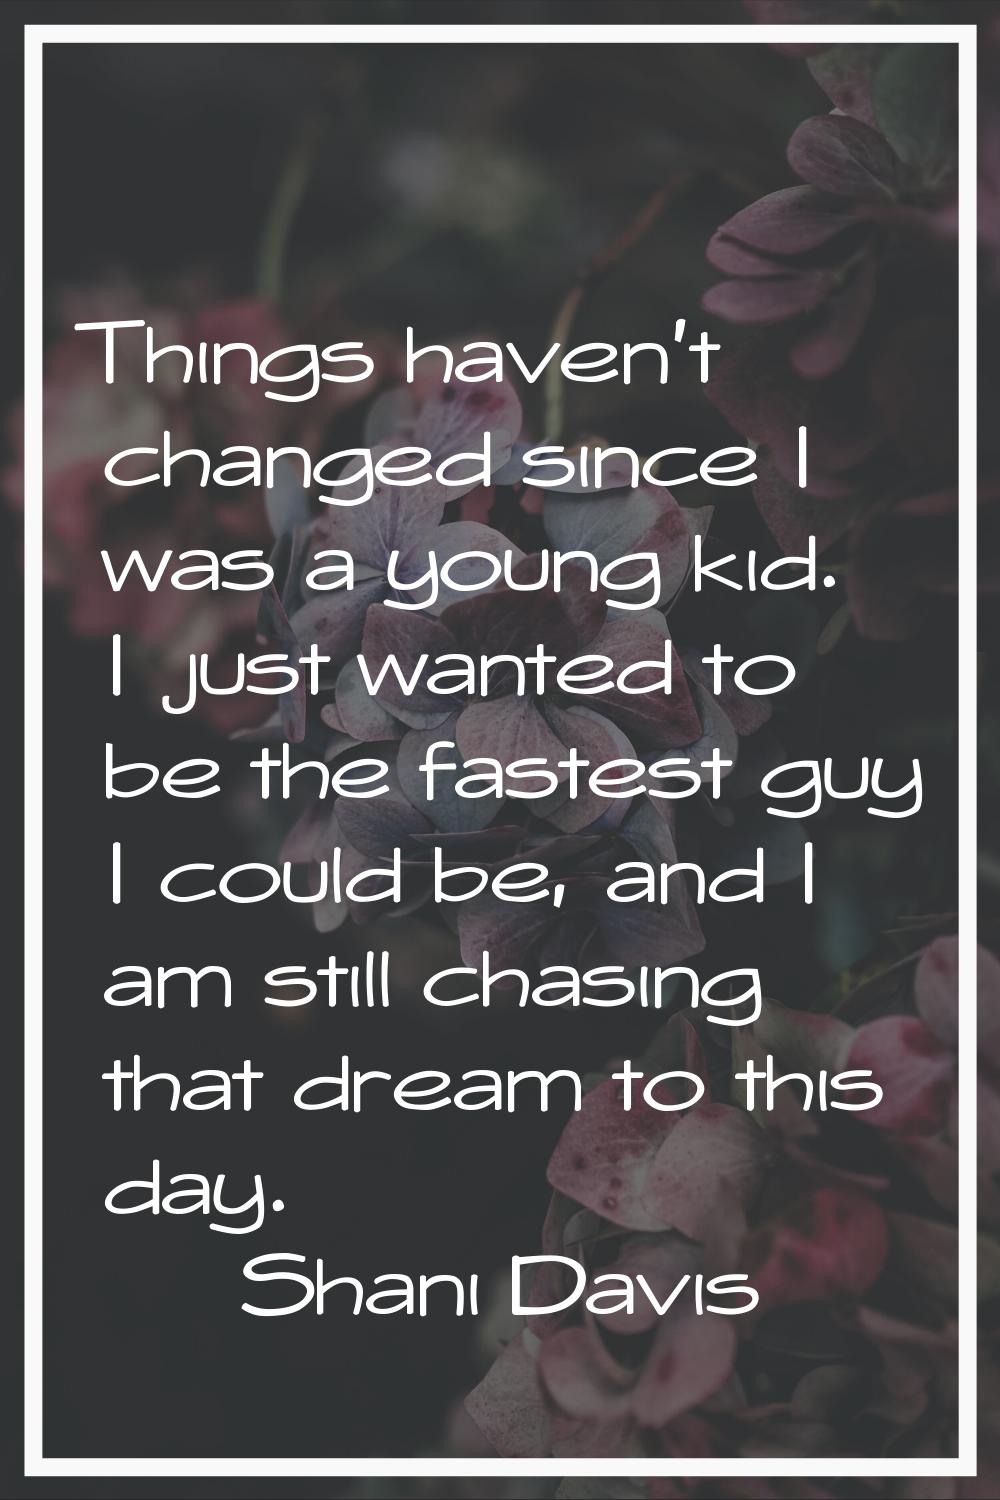 Things haven't changed since I was a young kid. I just wanted to be the fastest guy I could be, and